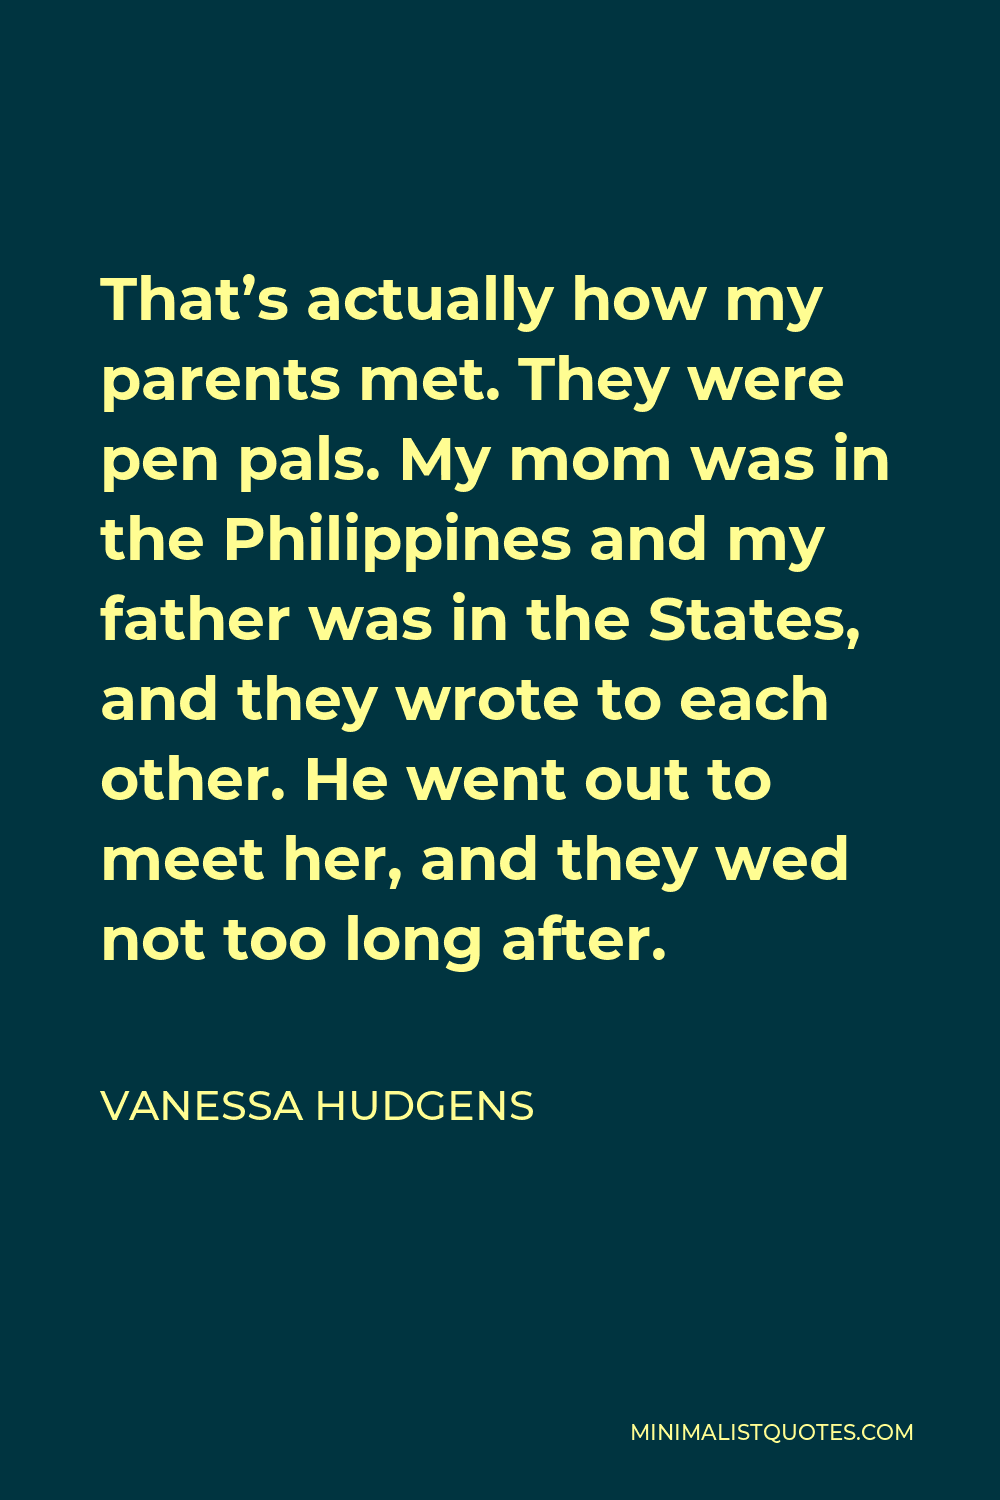 Vanessa Hudgens Quote - That’s actually how my parents met. They were pen pals. My mom was in the Philippines and my father was in the States, and they wrote to each other. He went out to meet her, and they wed not too long after.